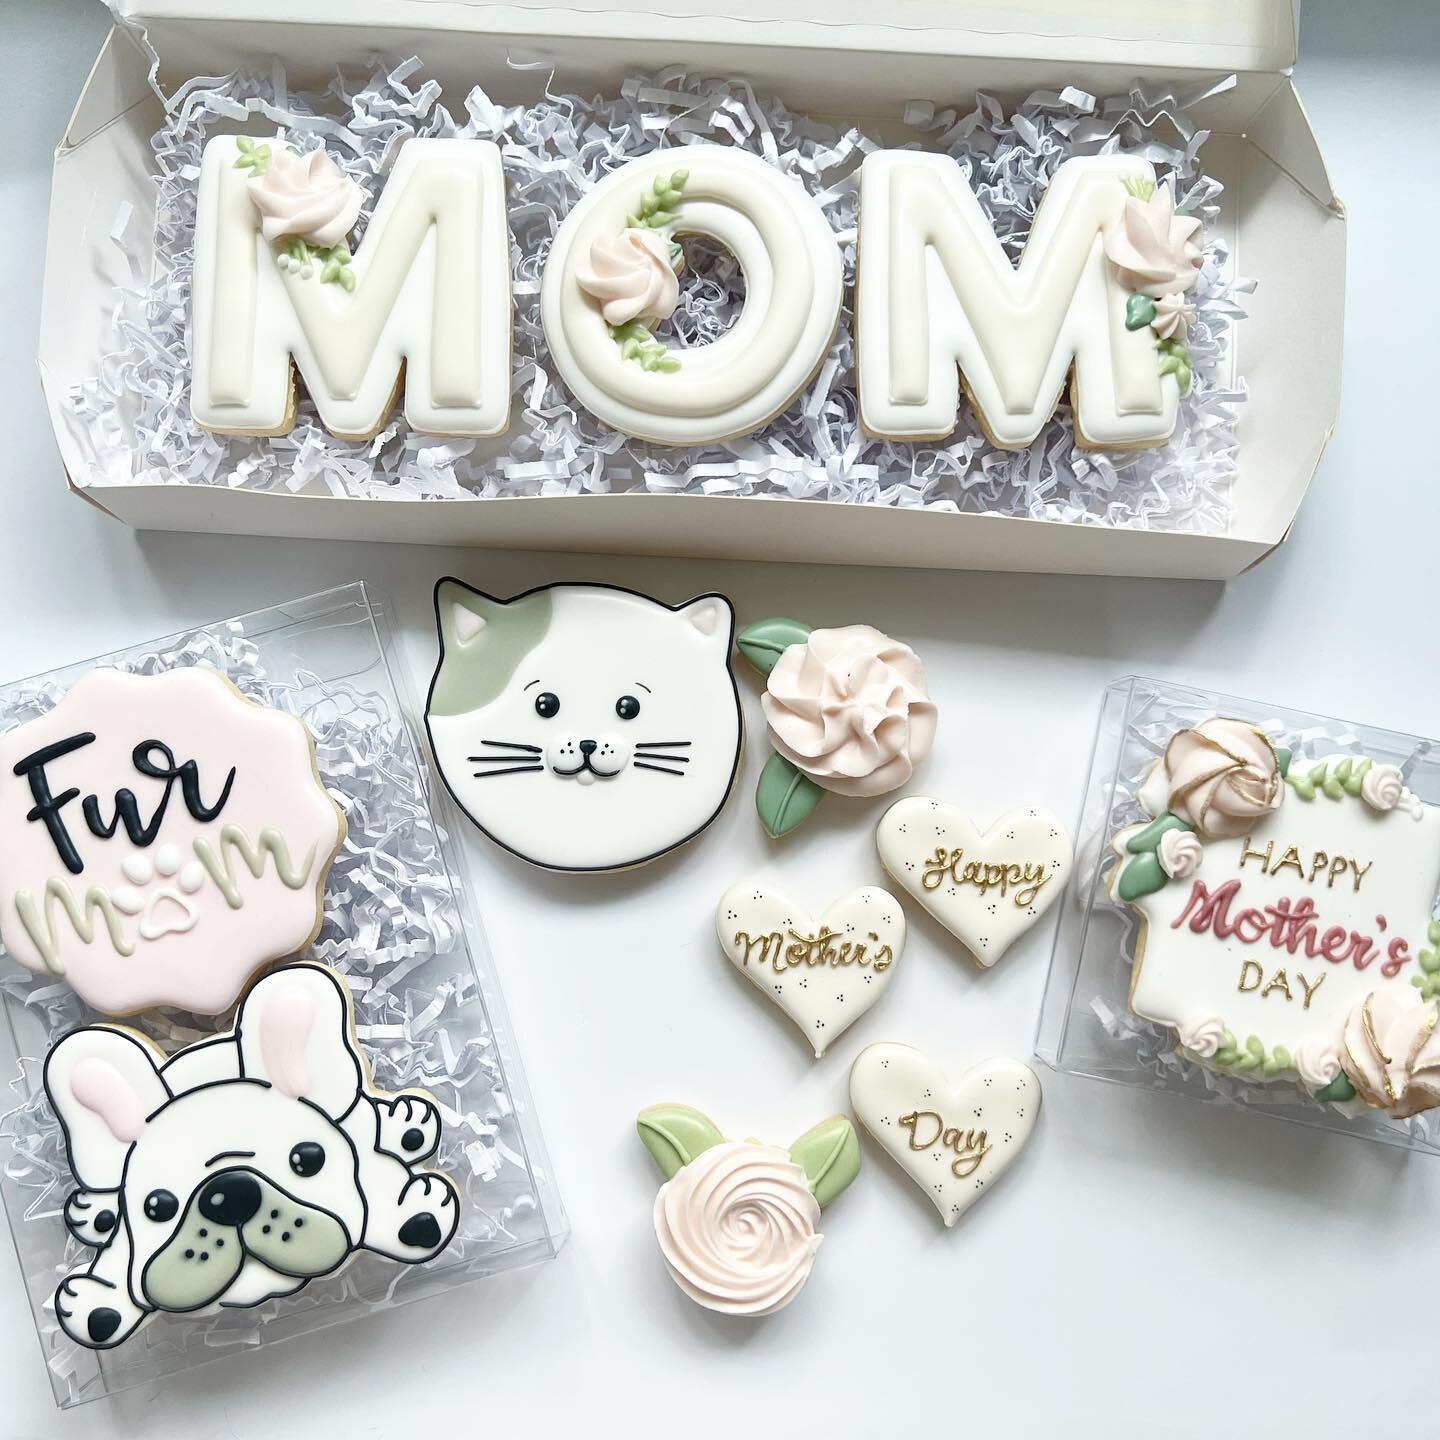 Mother&rsquo;s Day🤍

Shop Mother&rsquo;s Day cookies until May 6th! Give the perfect sweet treat to the special MOM in your life! Head to the shop sweets link in my bio to order yours today!

#samanthassweethouse #customcookies #cookiesofinstagram #